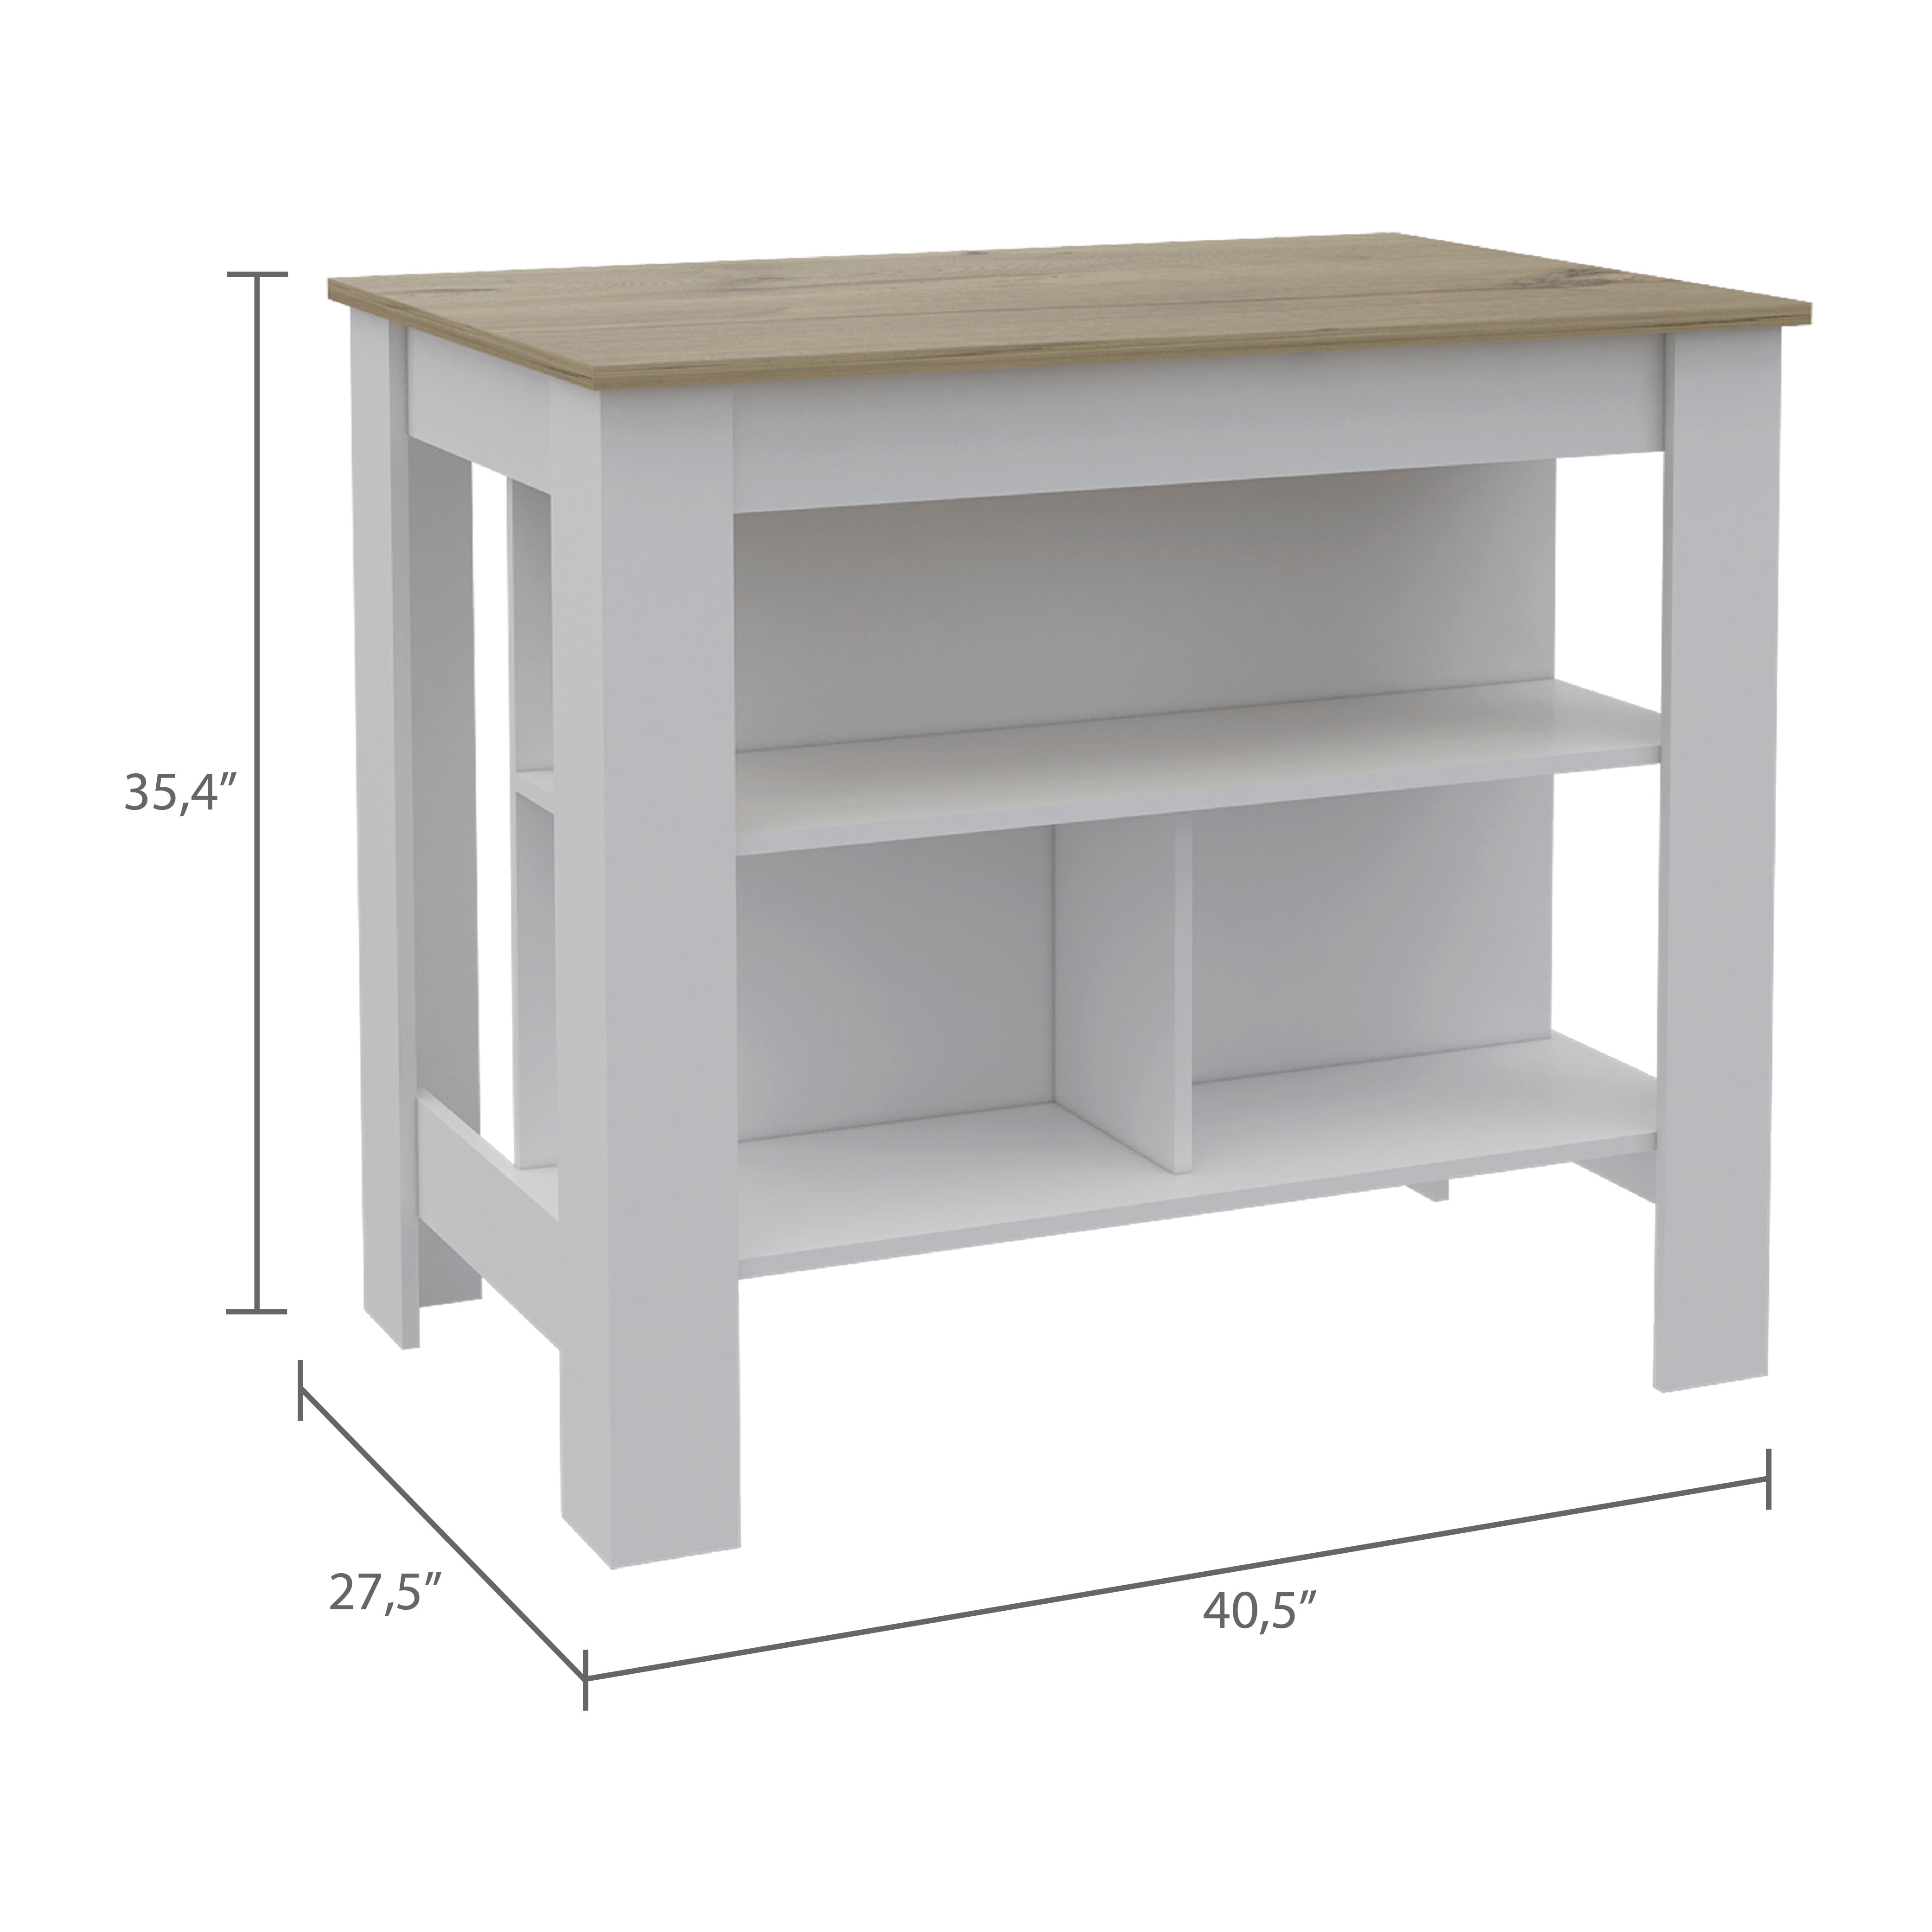 Boahaus Le Havre White Painted Kitchen Island， Wood Tabletop